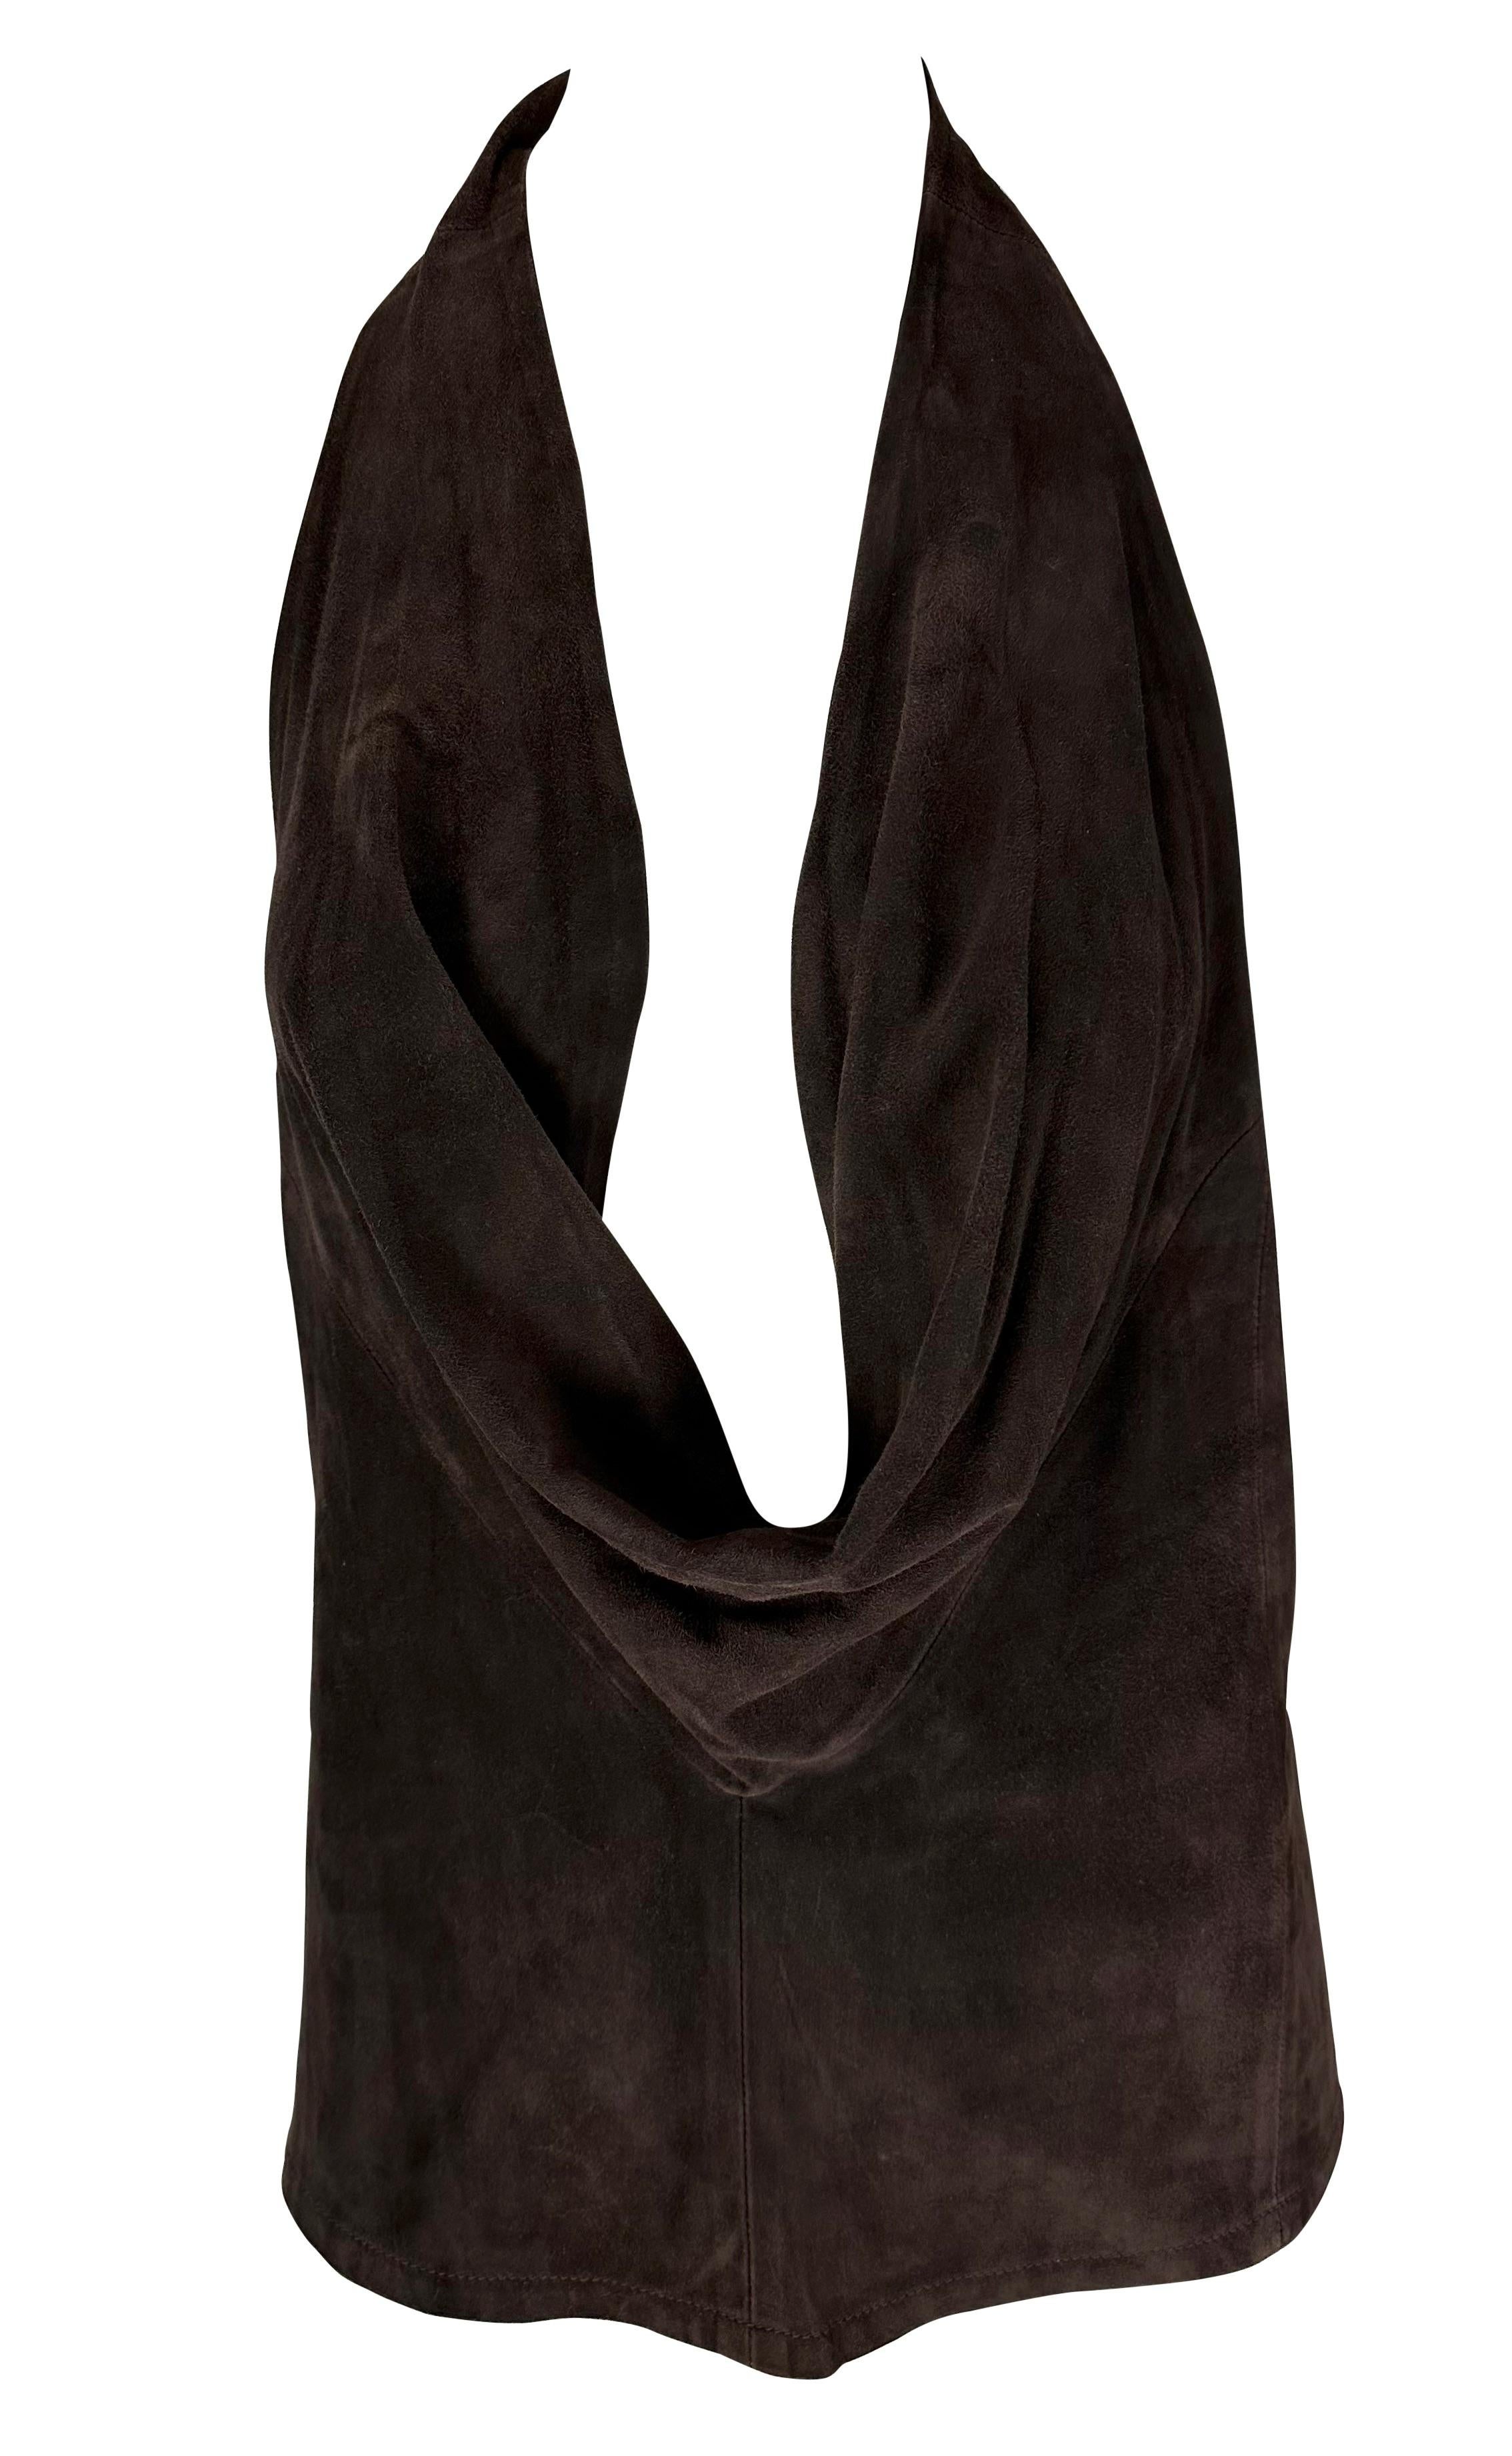 S/S 1997 Gucci by Tom Ford Brown Suede Cowl Neck Halter Top Blouse Backless 2